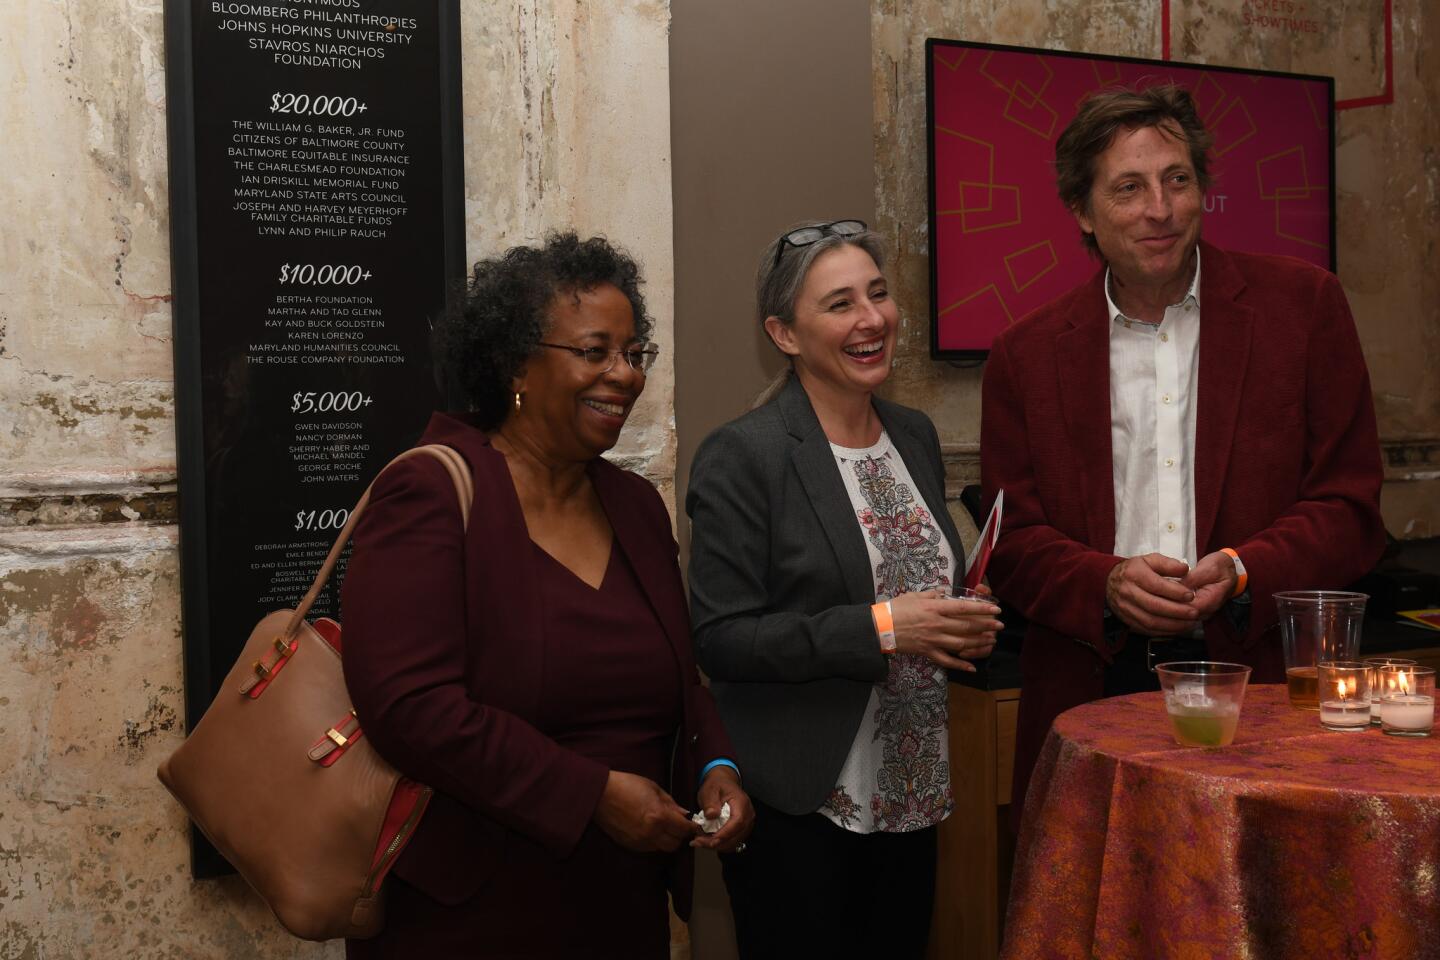 Sheri Parks, left, Beatriz Bufrahi and Richard Chisolm attended Maryland Film Festival's Director's Cut: A Celebration of Jed Dietz at The Stavros Niarchos Foundation Parkway Theatre.